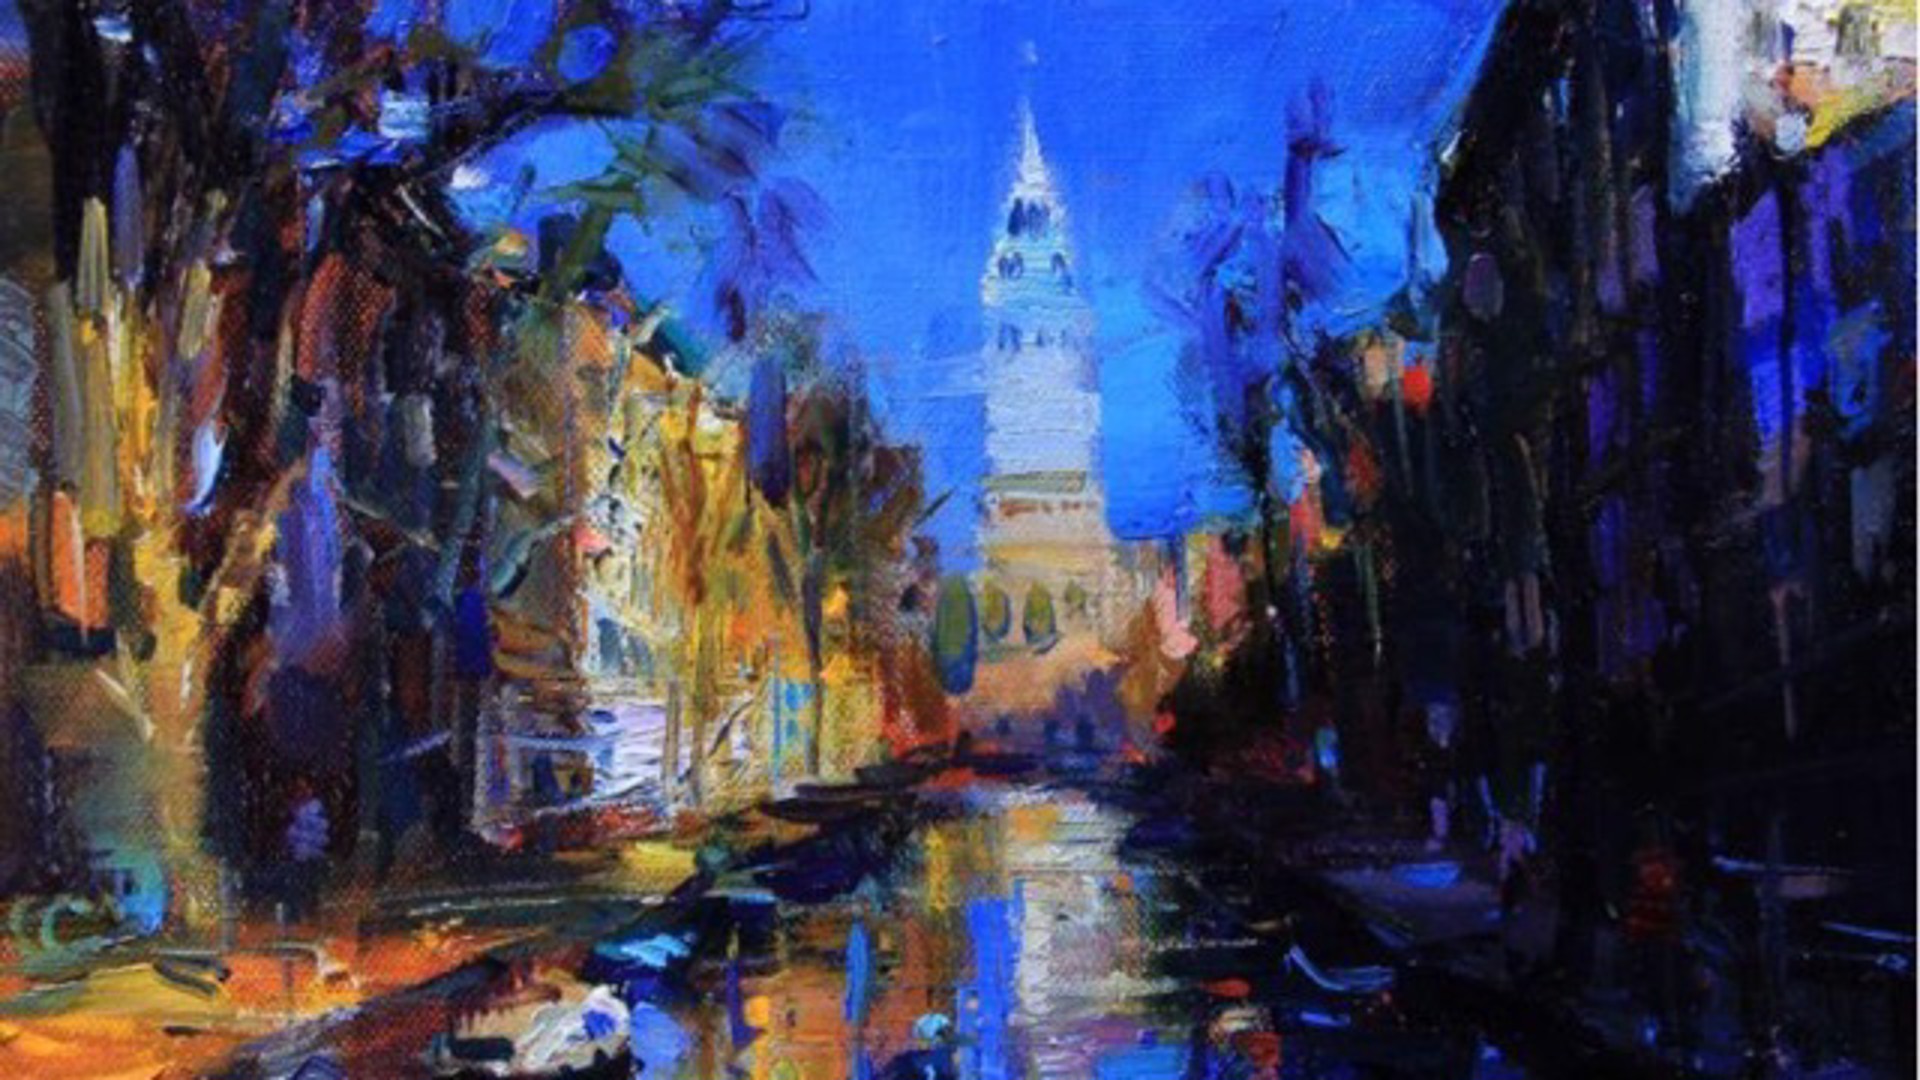 Amsterdam Postcards From Around the World by Michael Flohr